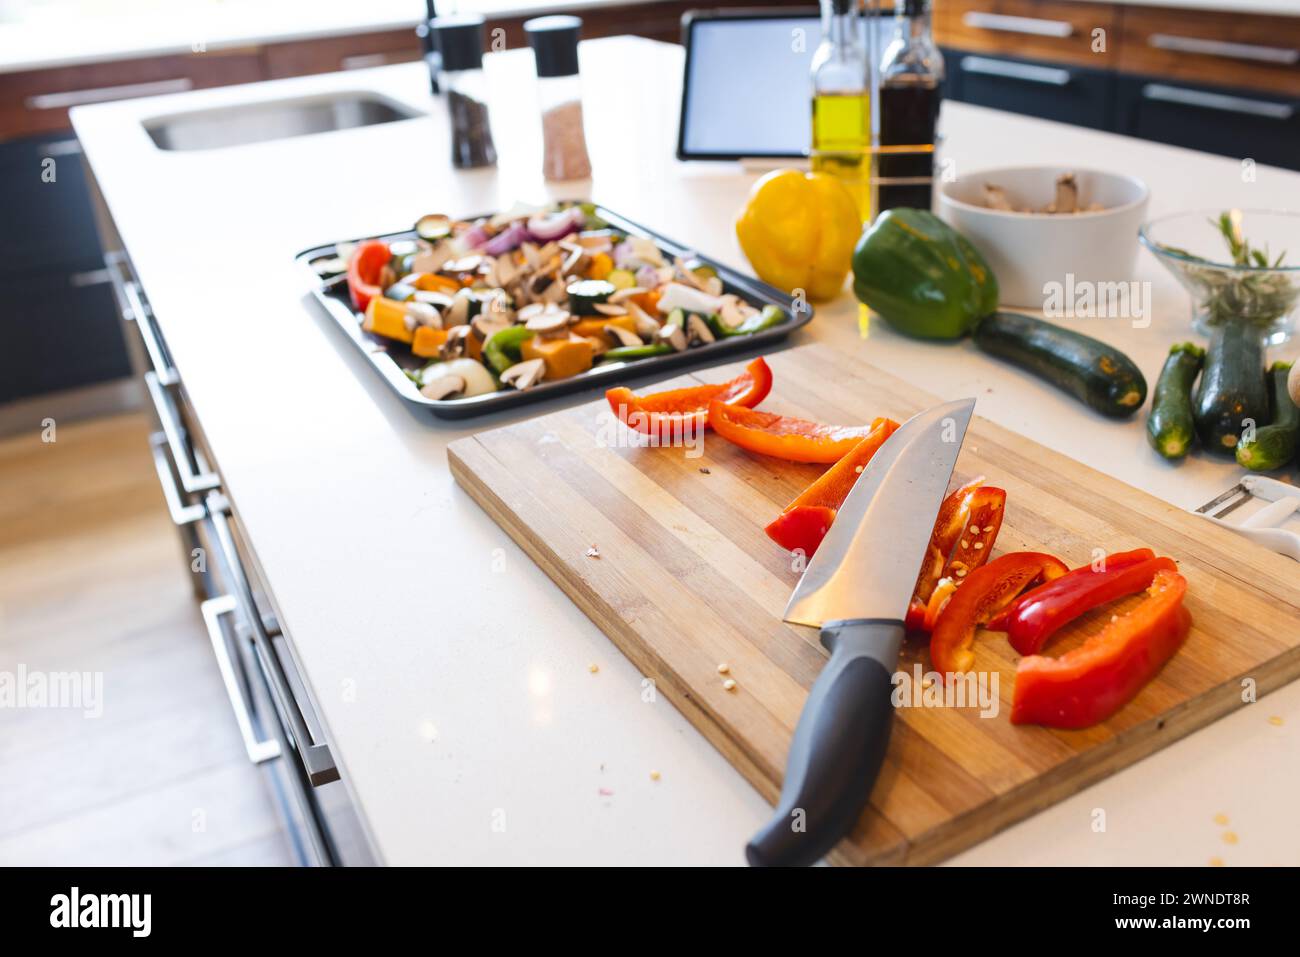 A kitchen counter displays chopped vegetables and a knife on a cutting board Stock Photo